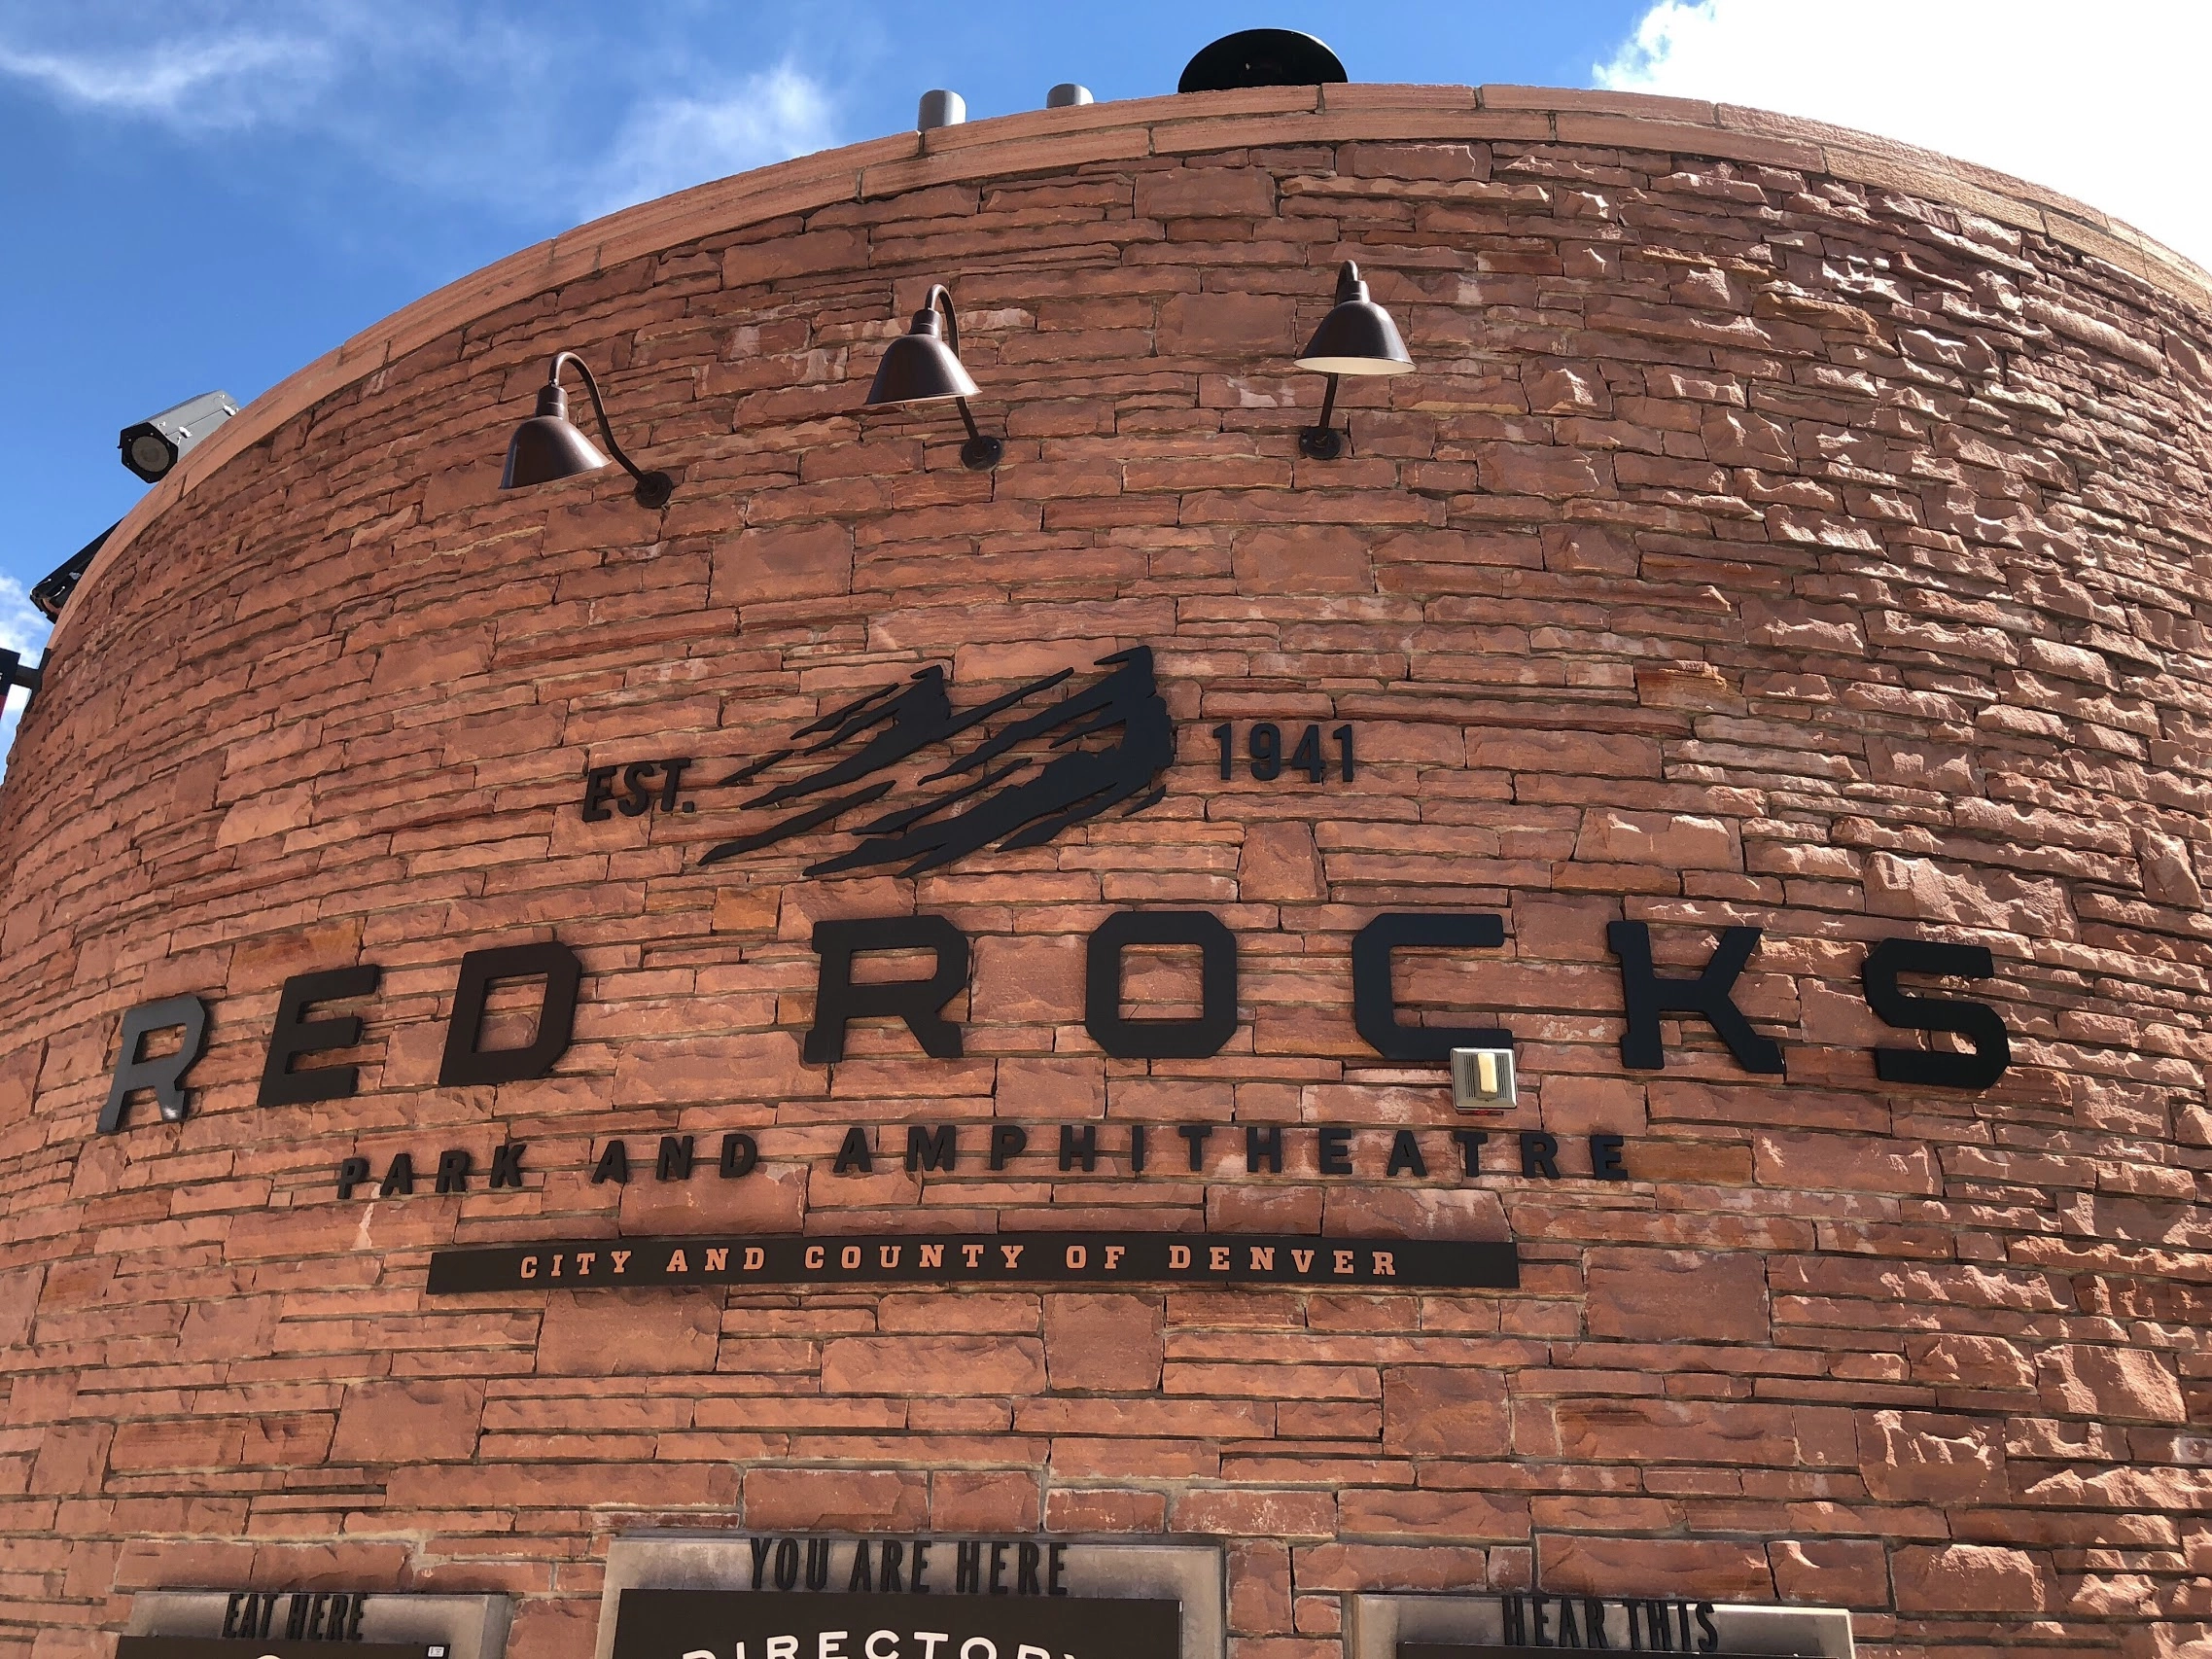 outdoor concessions with digital signage at red rocks amphitheater